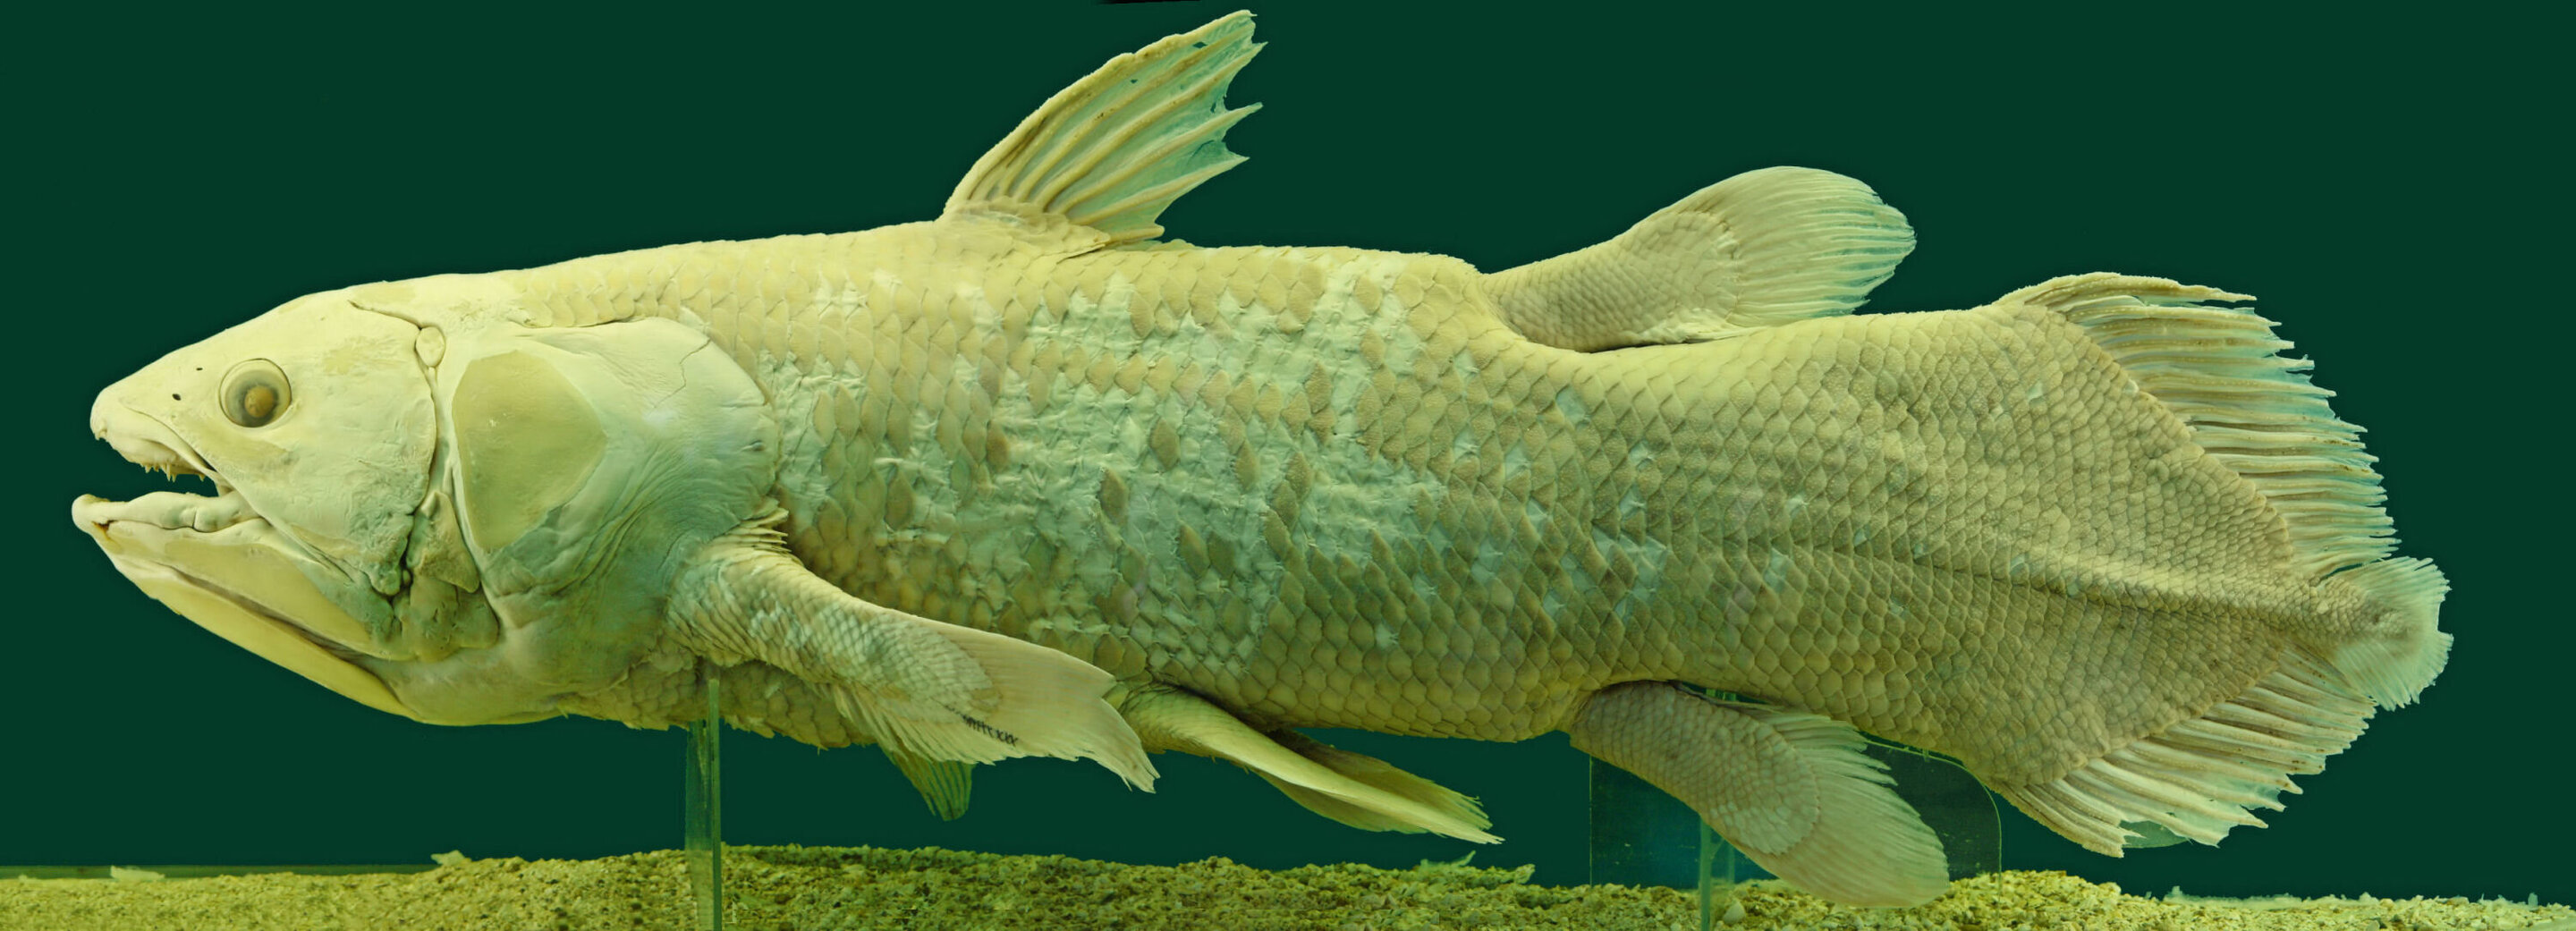 How the coelacanth has recently developed dozens of new genes